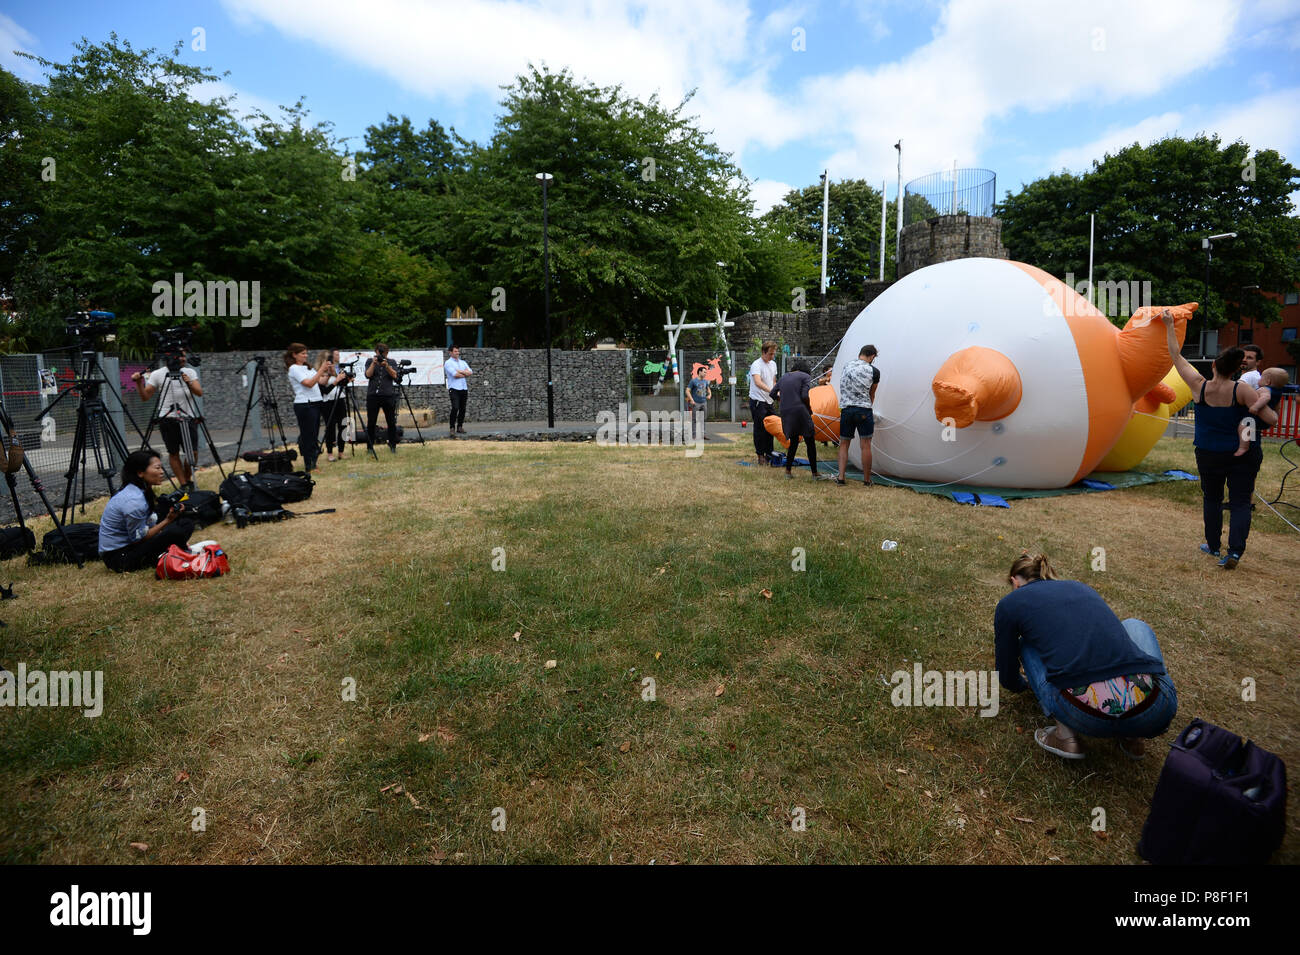 The Trump Baby Blimp is inflated during a practice test, at Bingfield Park in north London. Stock Photo